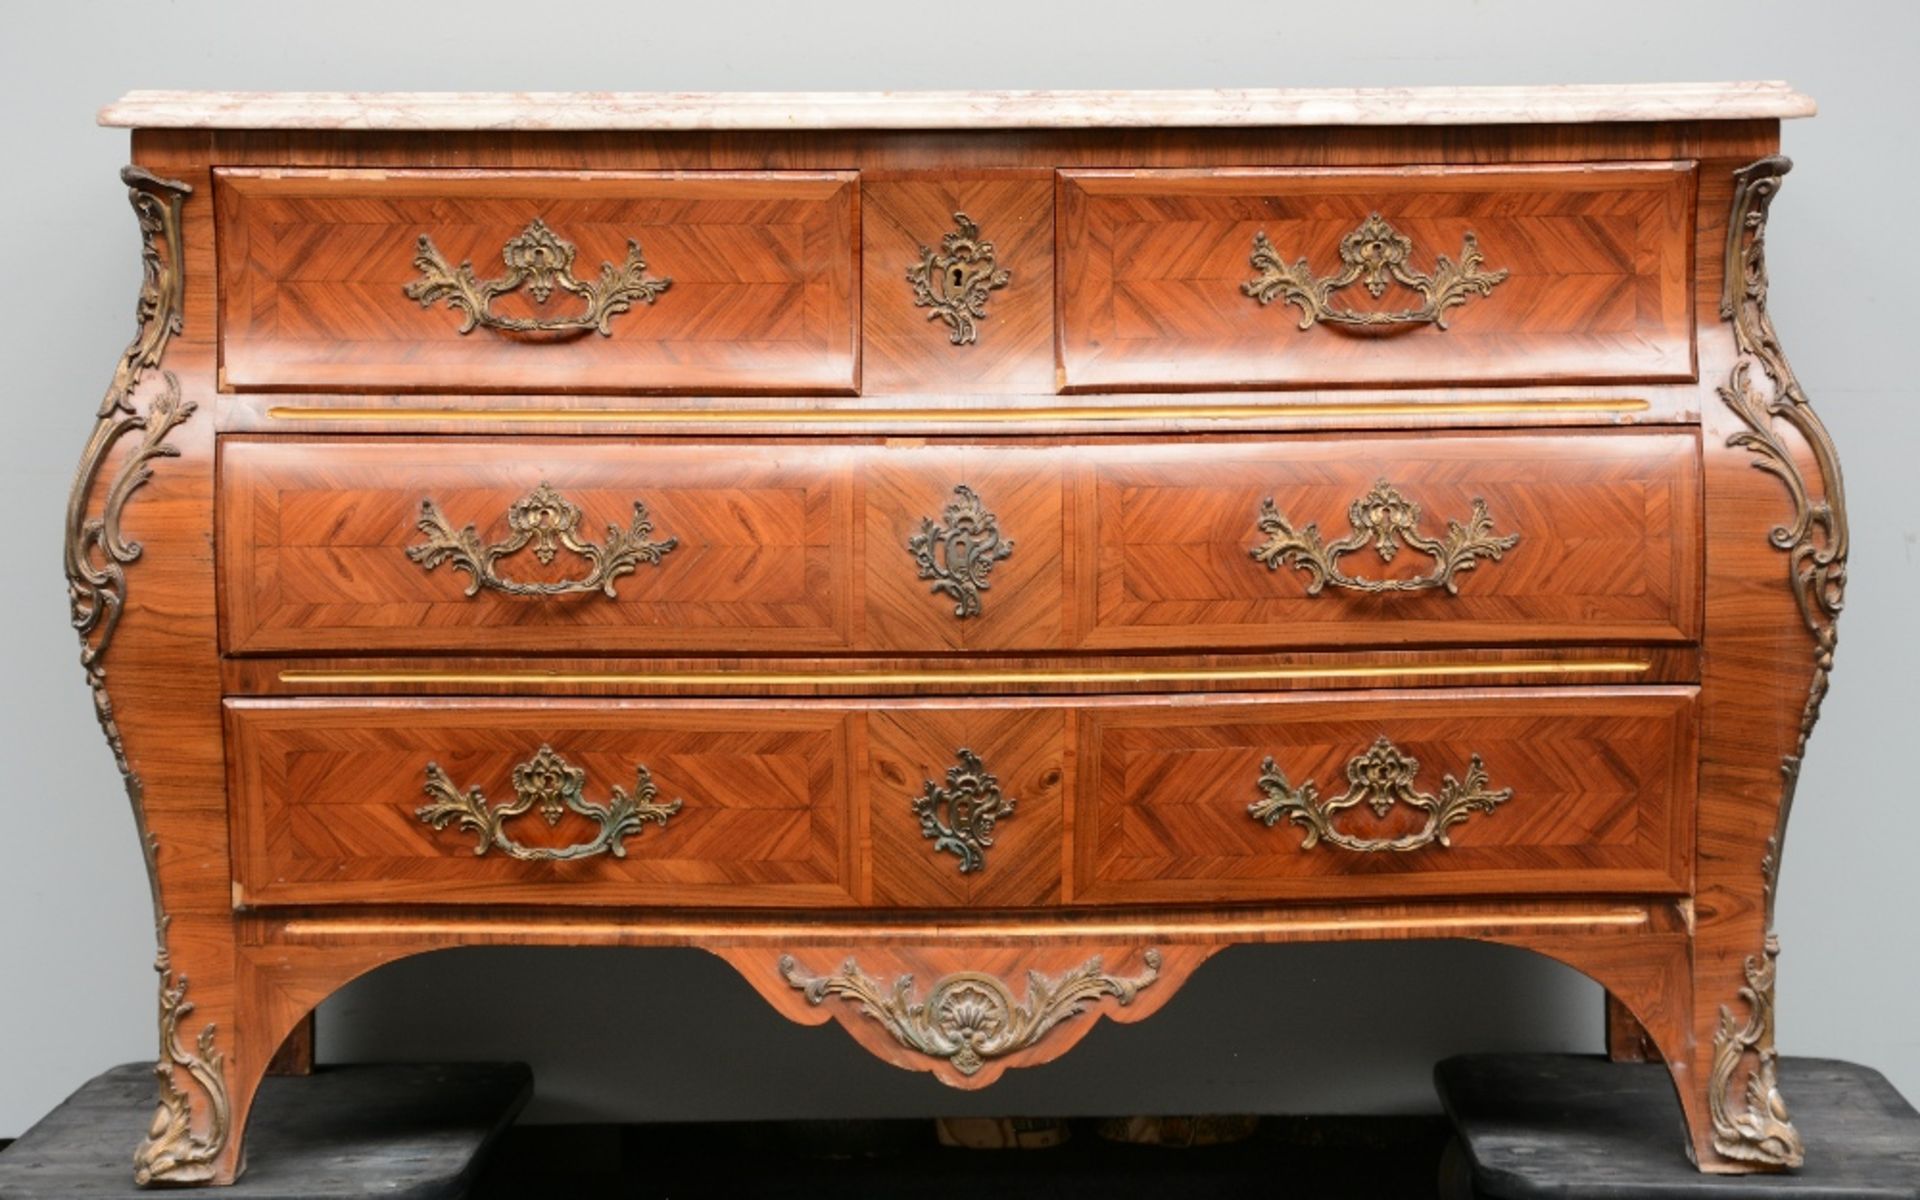 A Regency-style rosewood-marquetry commode with a marble top and fine bronze mounts, H 88 - W